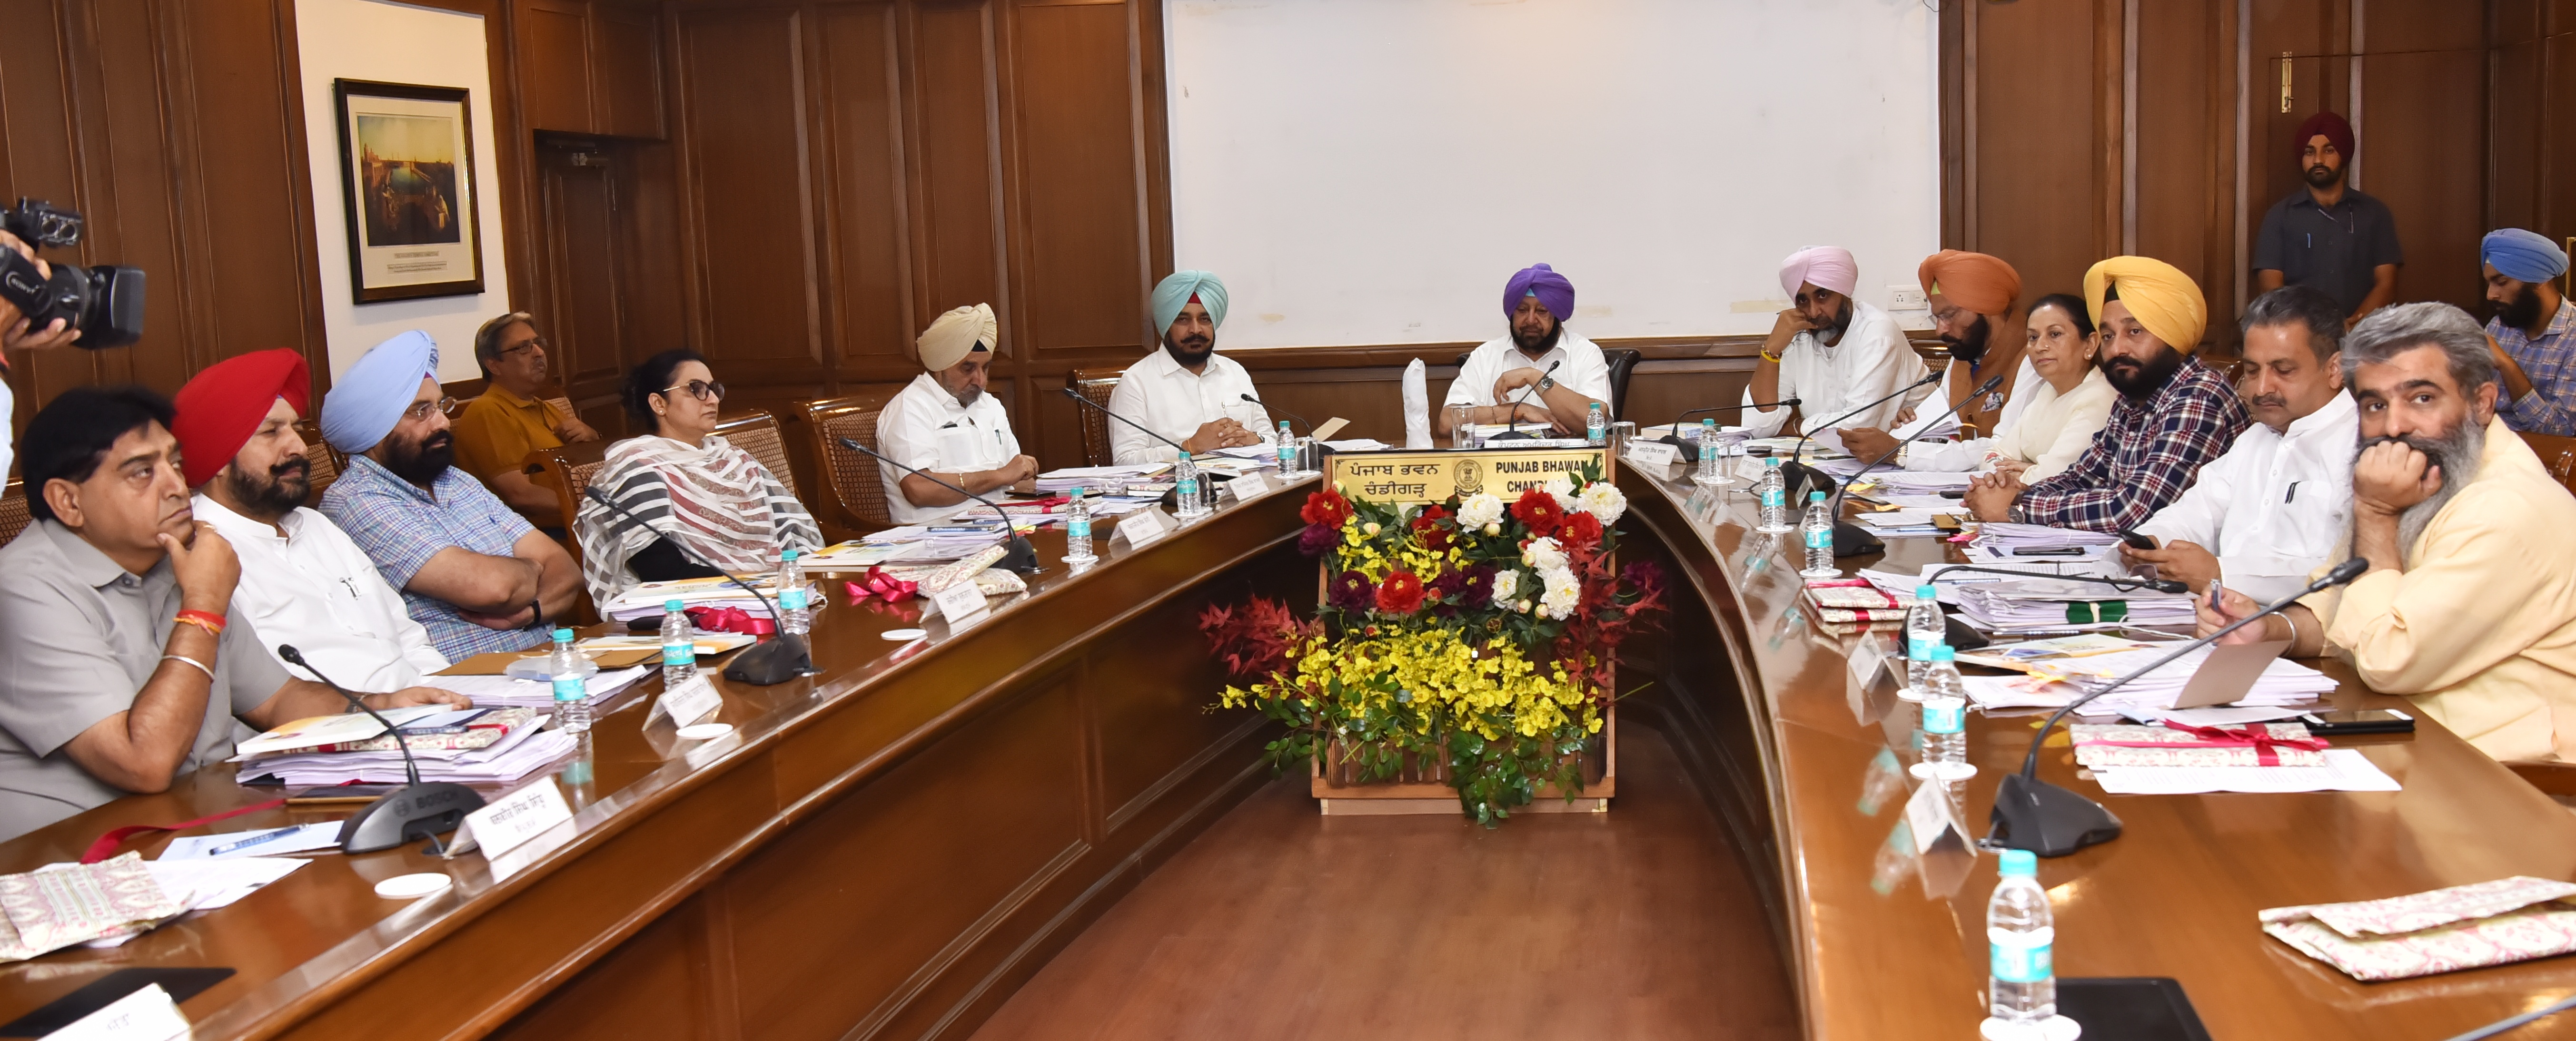 punjab-eases-civil-services-personnel-recruitment-rules-to-fill-vacant-posts